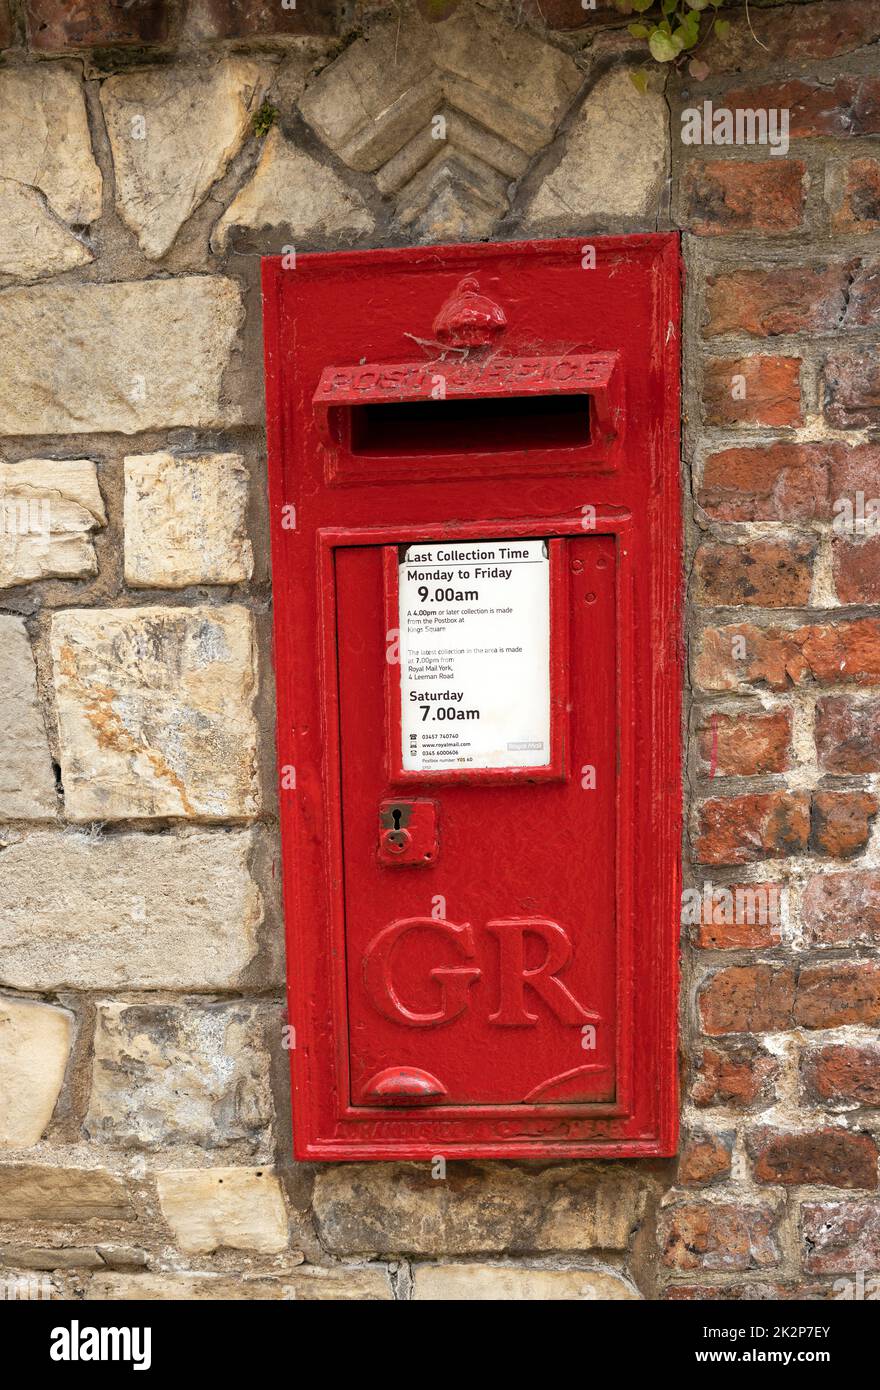 An old wall mounted postbox from the reign of King George, the late Queen's father is still in daily use next to York Minster. Stock Photo